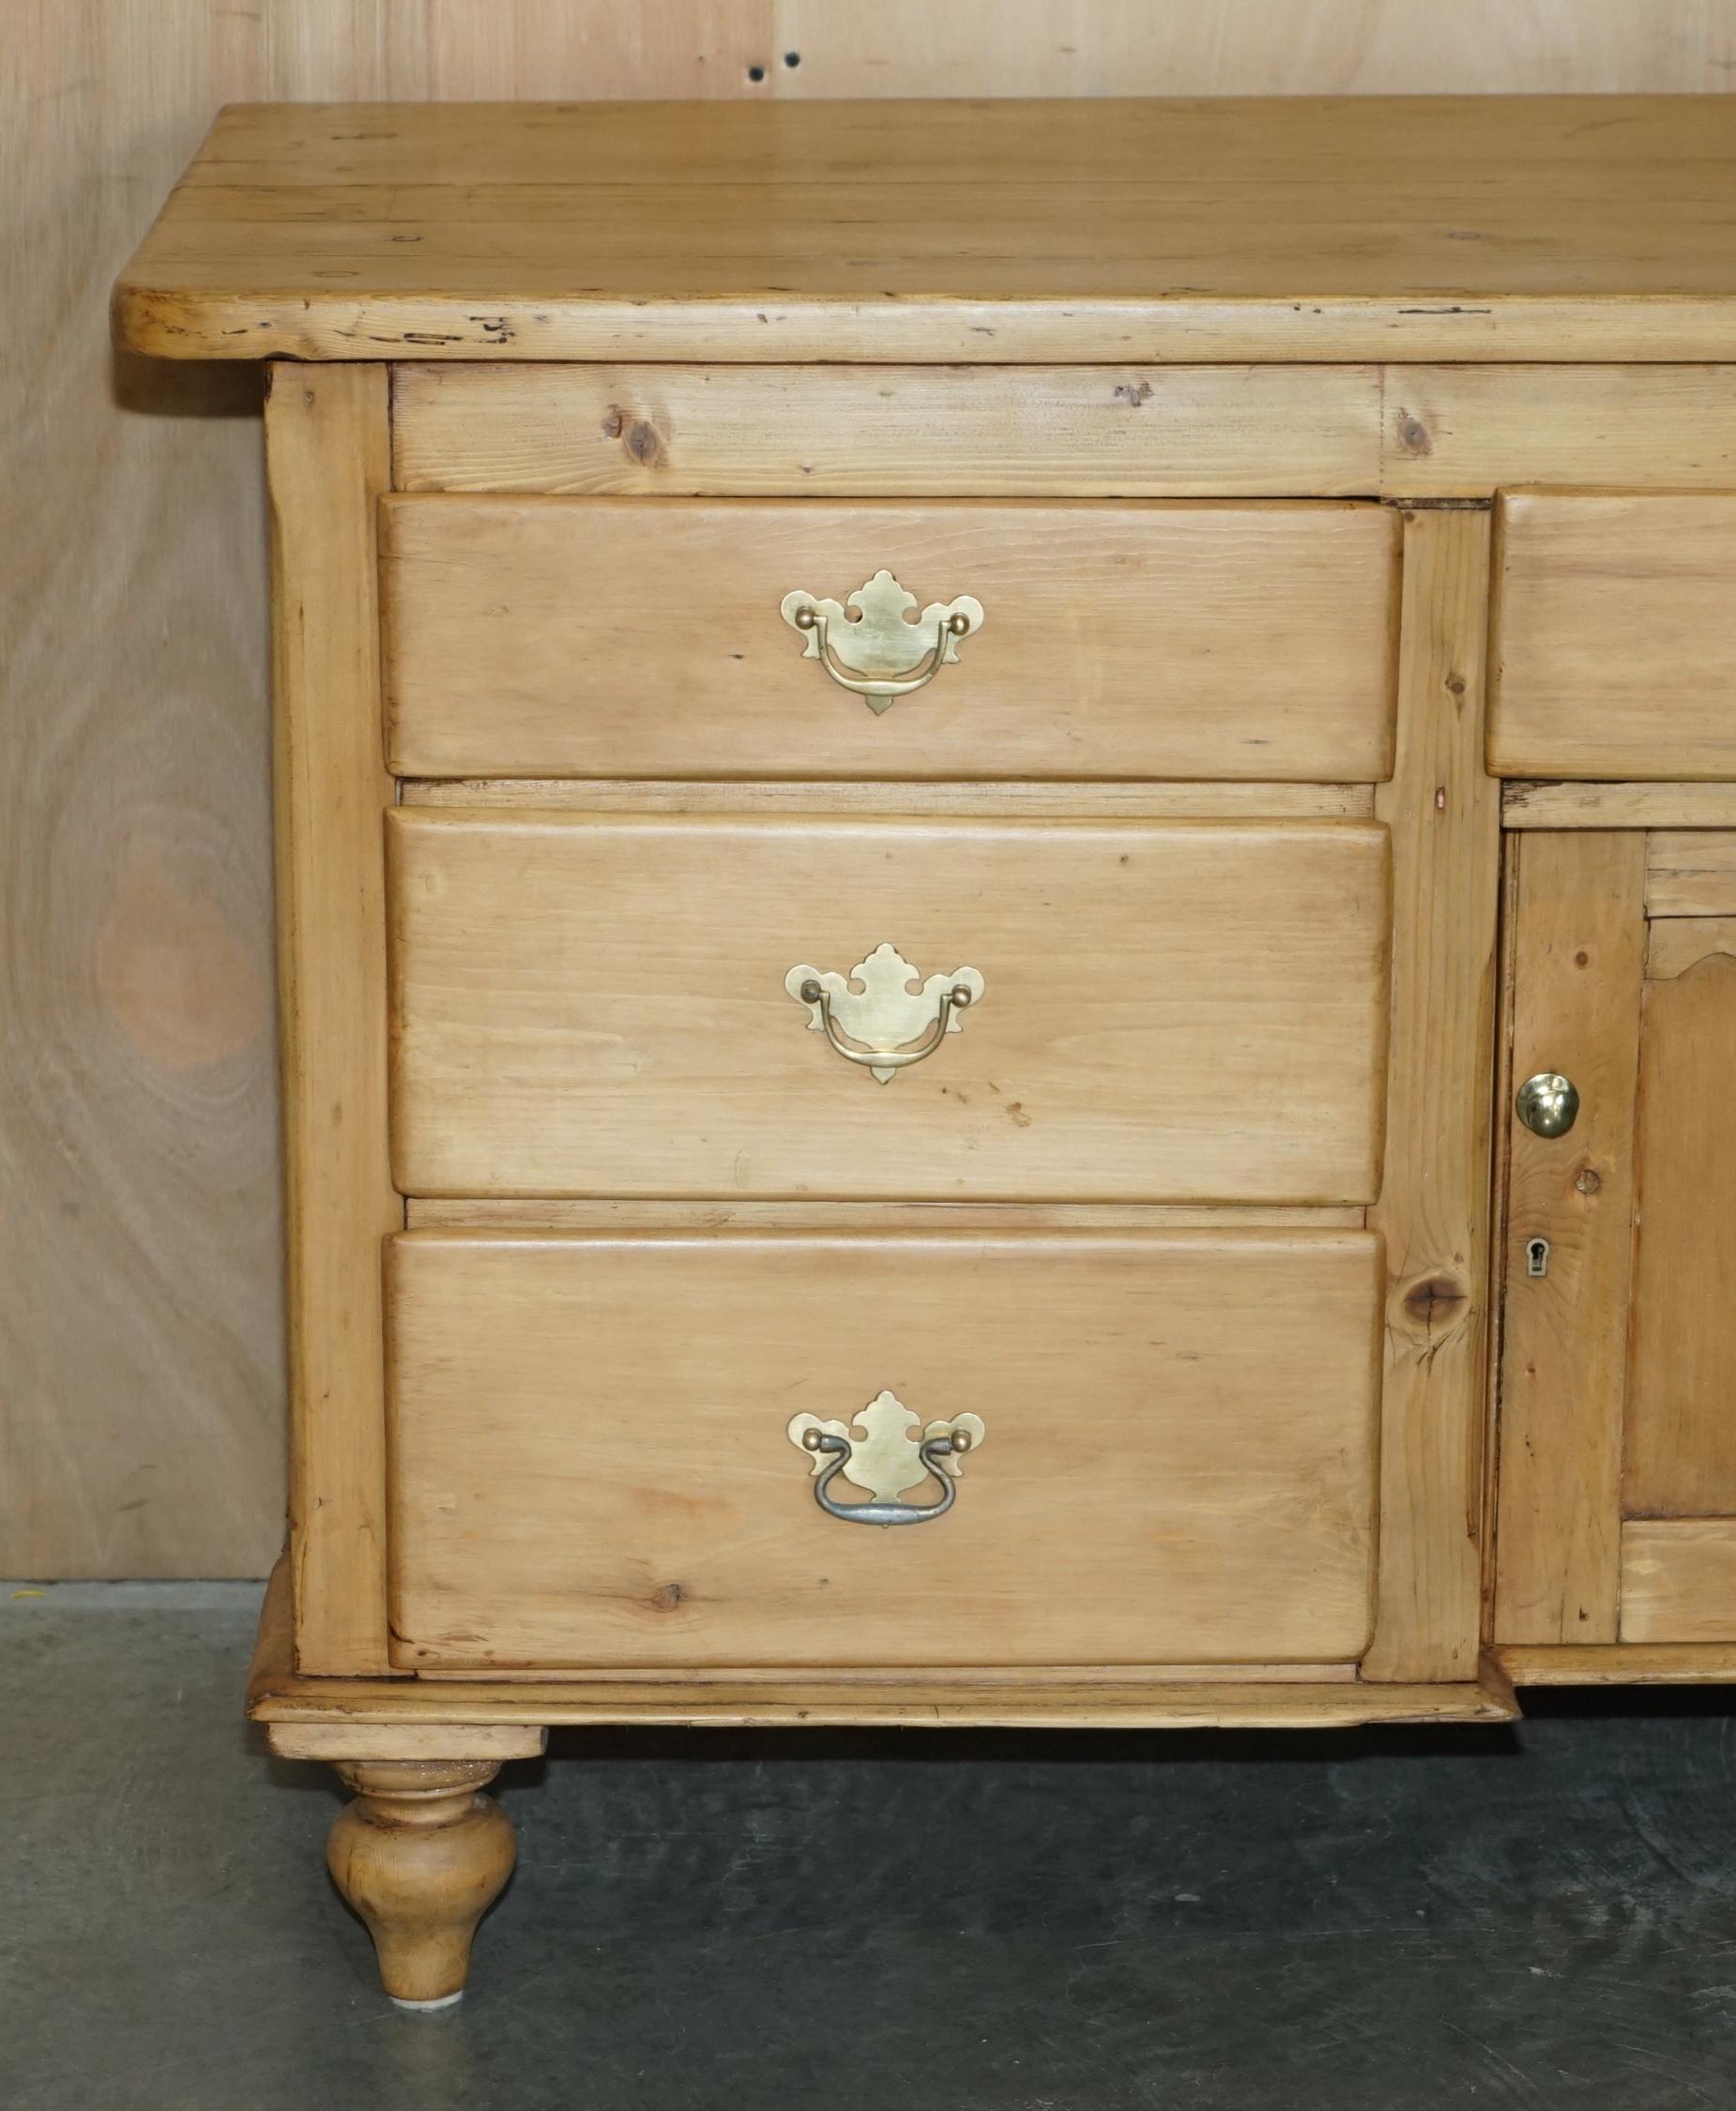 High Victorian STUNNING FULLY RESTORED ANTIQUE CIRCA 1860 STRiPPED PINE HOUSEKEEPERS SIDEBOARD For Sale